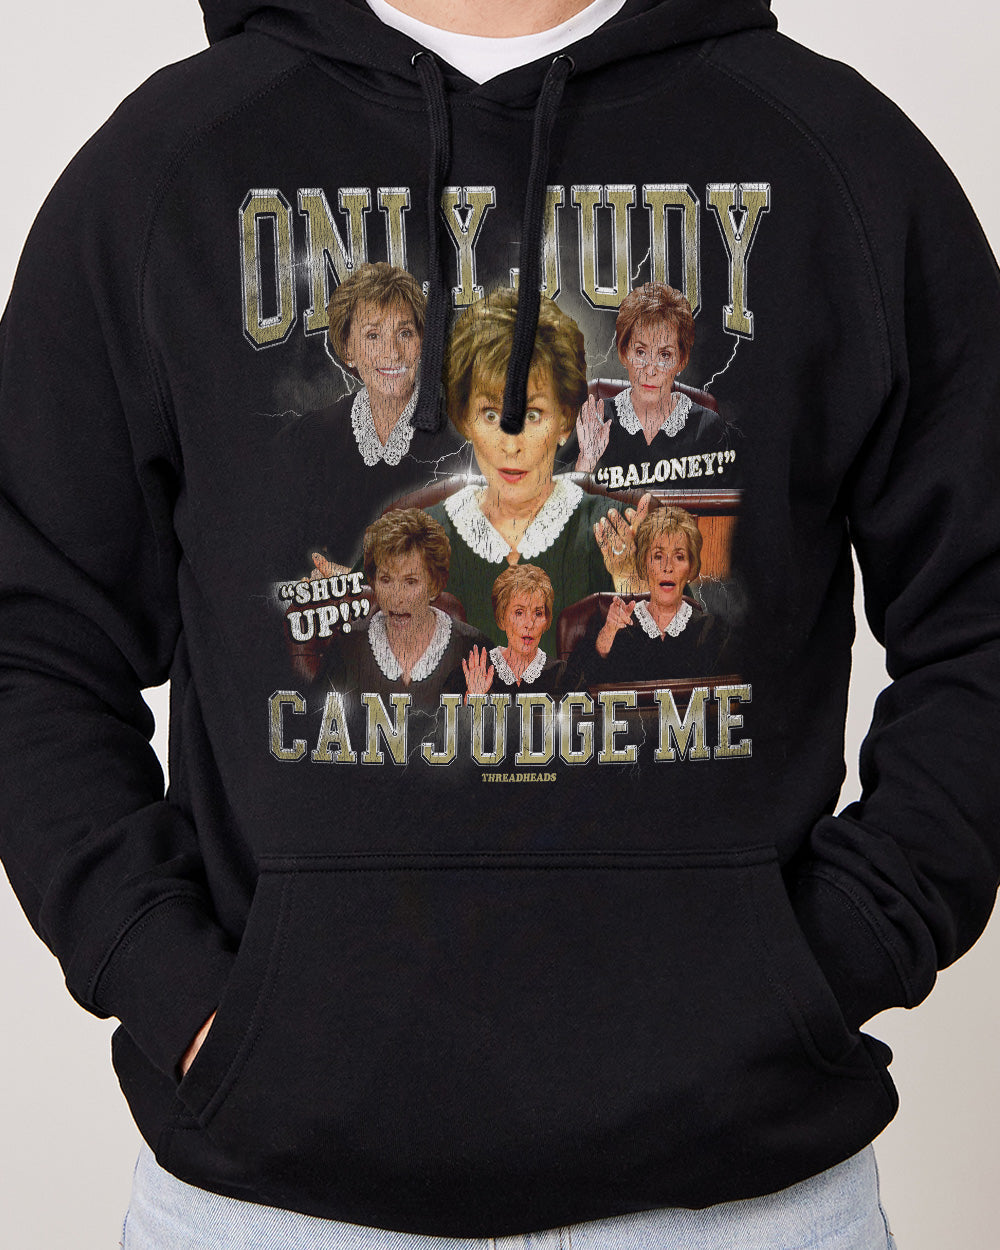 Vintage All Rise For Judge Judy t shirt